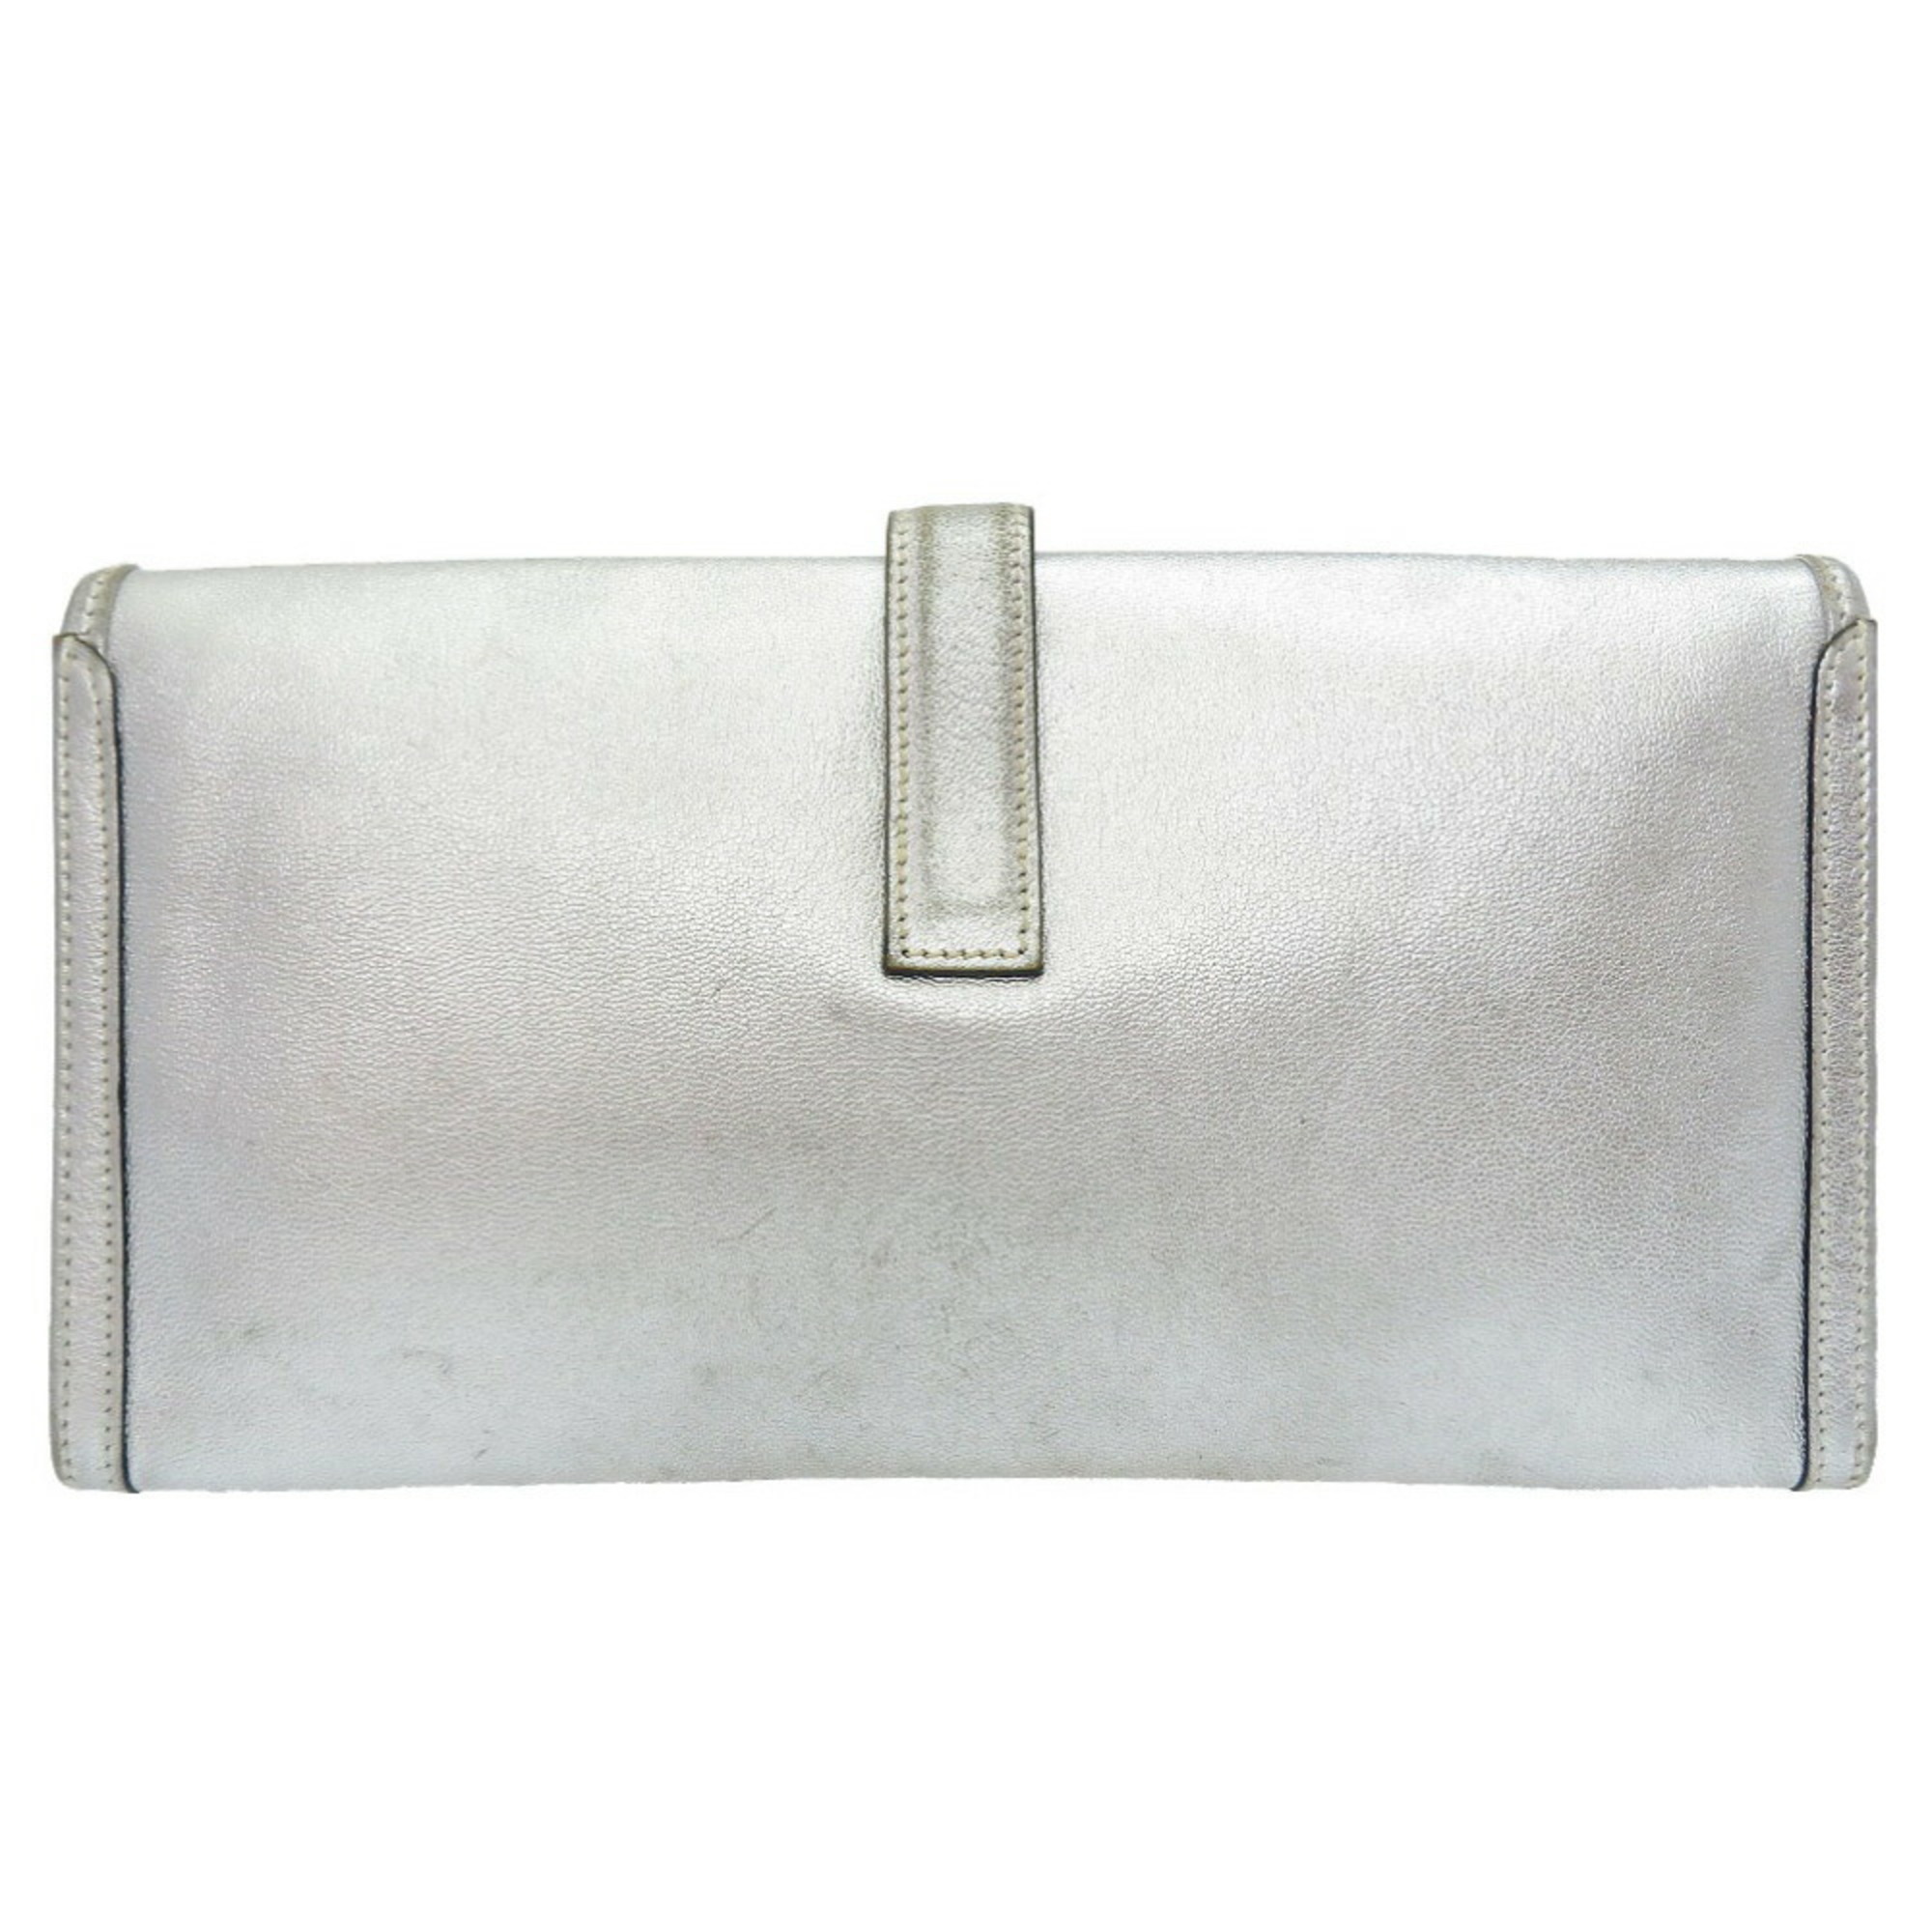 Hermes Jige Athens Olympics Limited Edition Chevre Silver H Stamp Clutch Bag 0019 HERMES